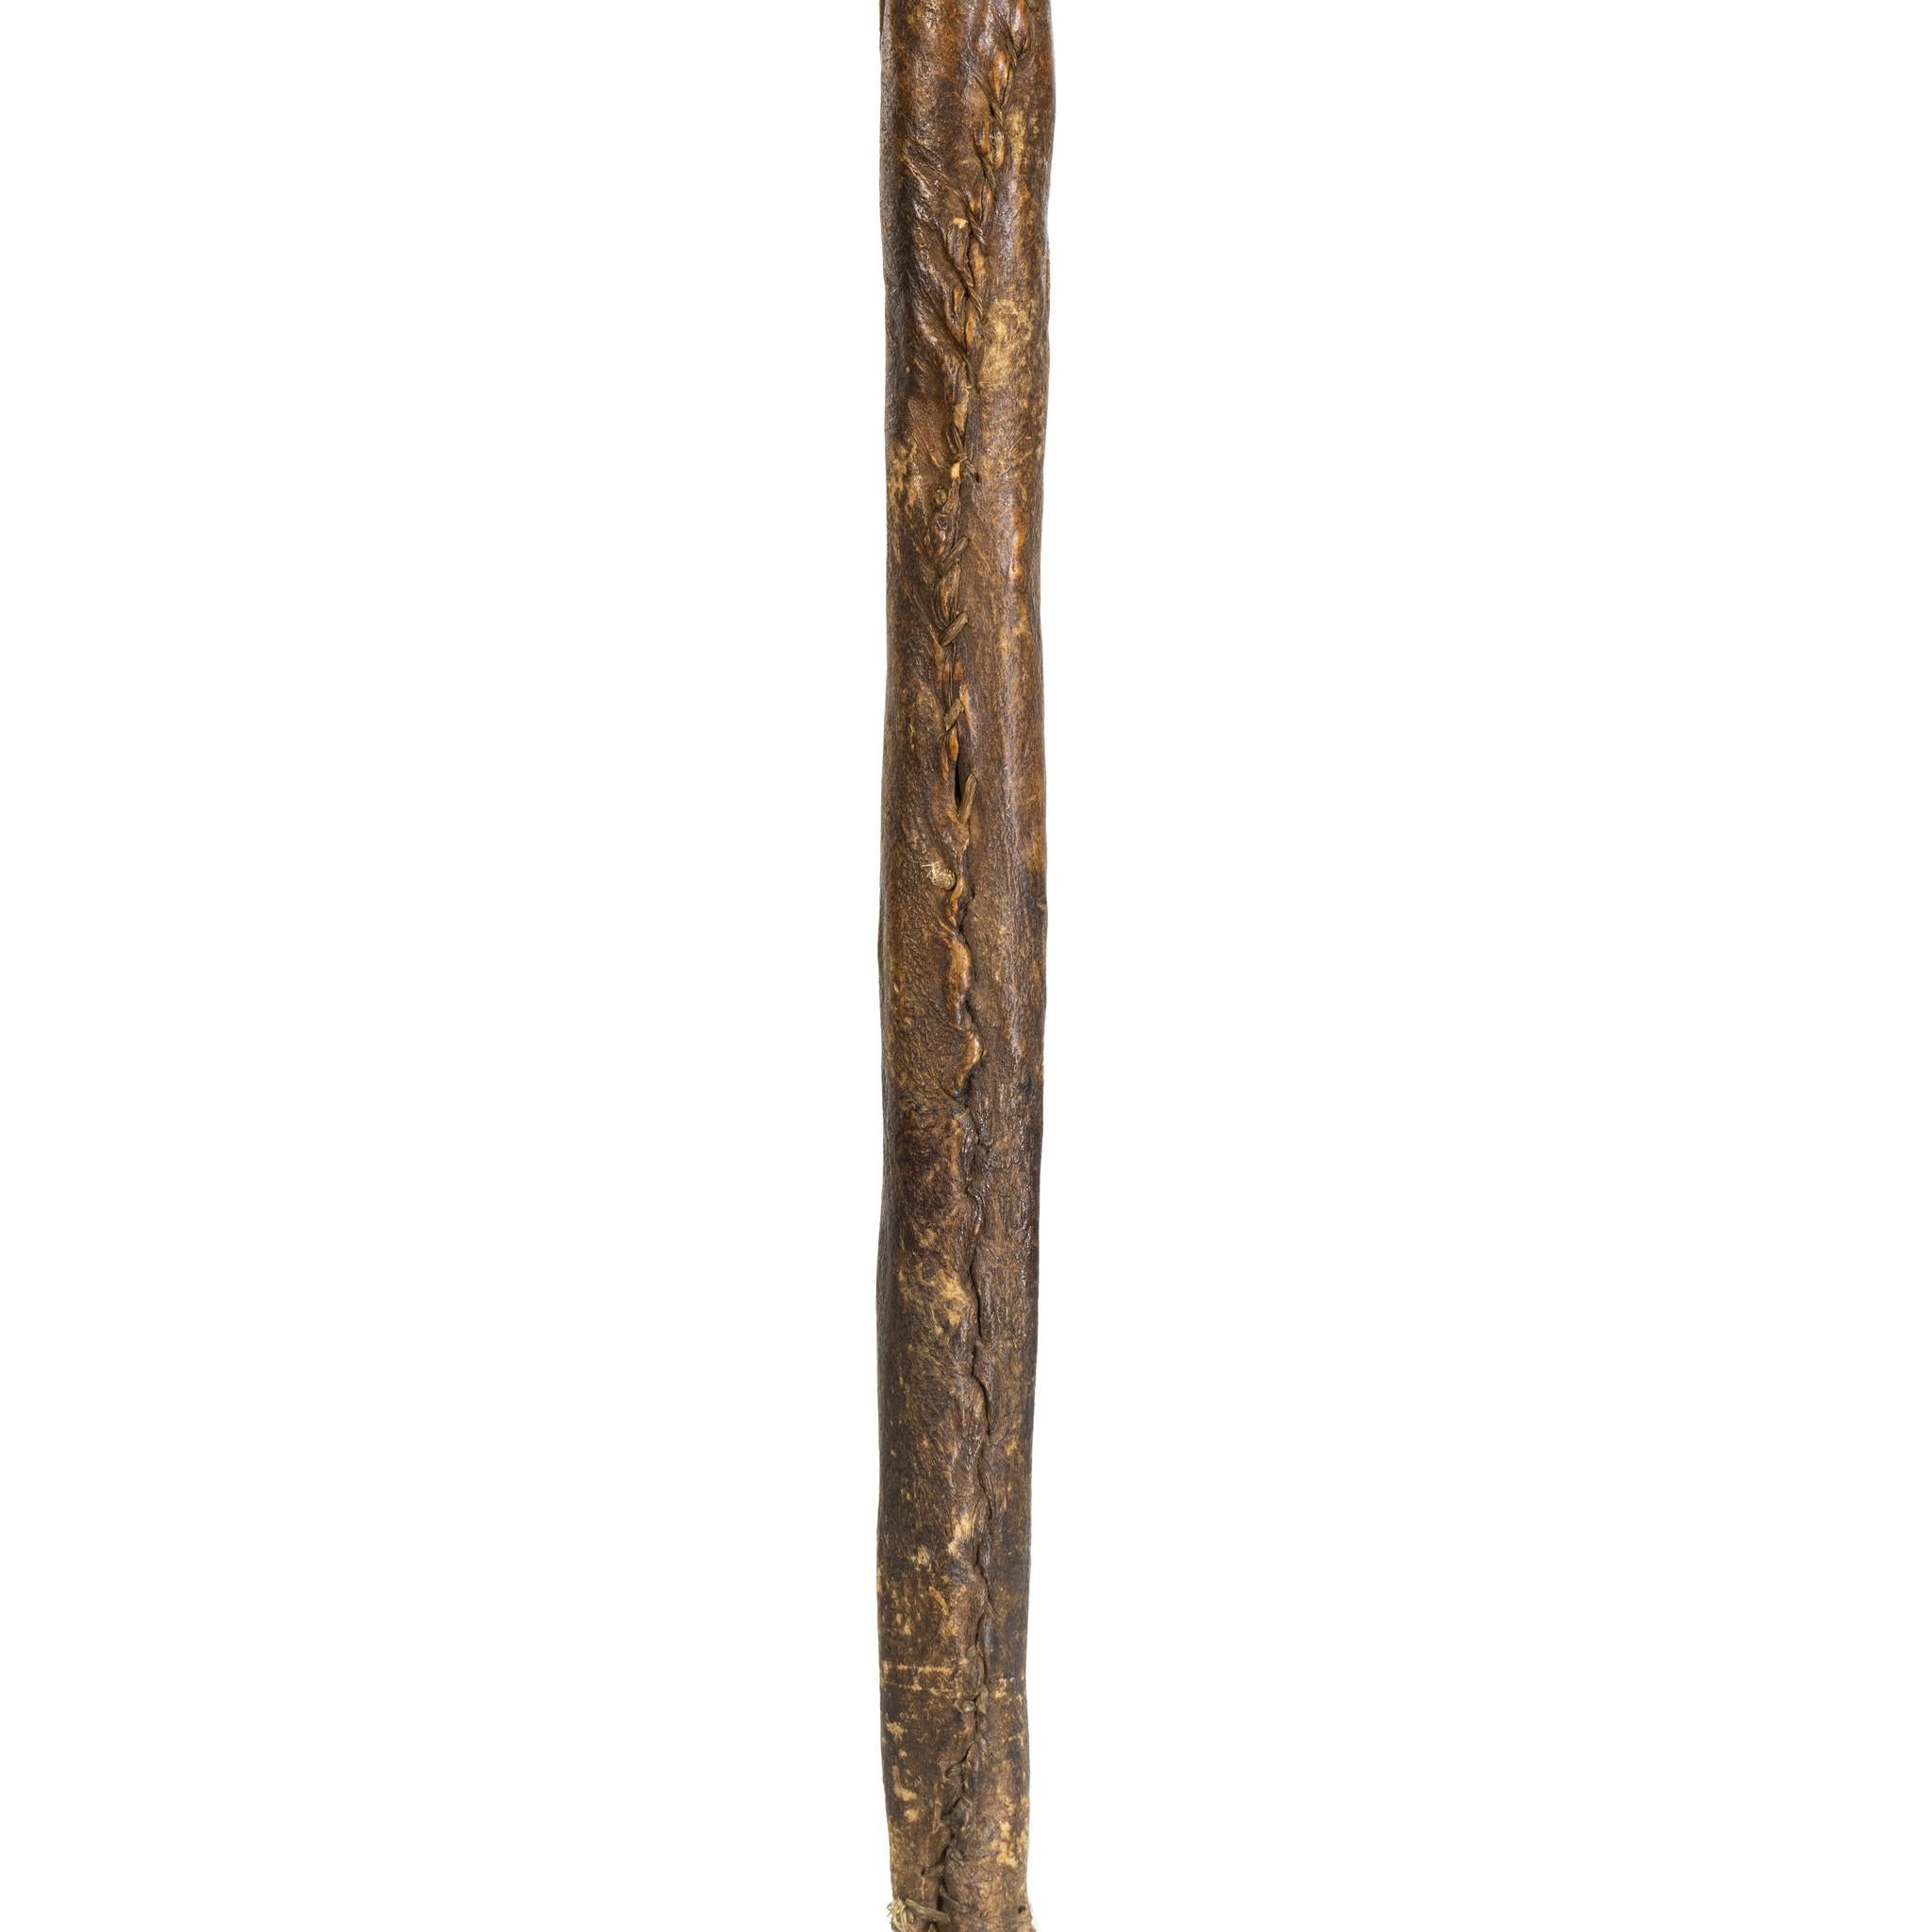 Northern Plains war club with stylized stone buffalo head. Raw hide wrapped adorned with brass tacks. Much patina from use, blood, grease and sweat. Museum quality.

Period: Mid-19th century
Origin: Northern Plains
Size: 26